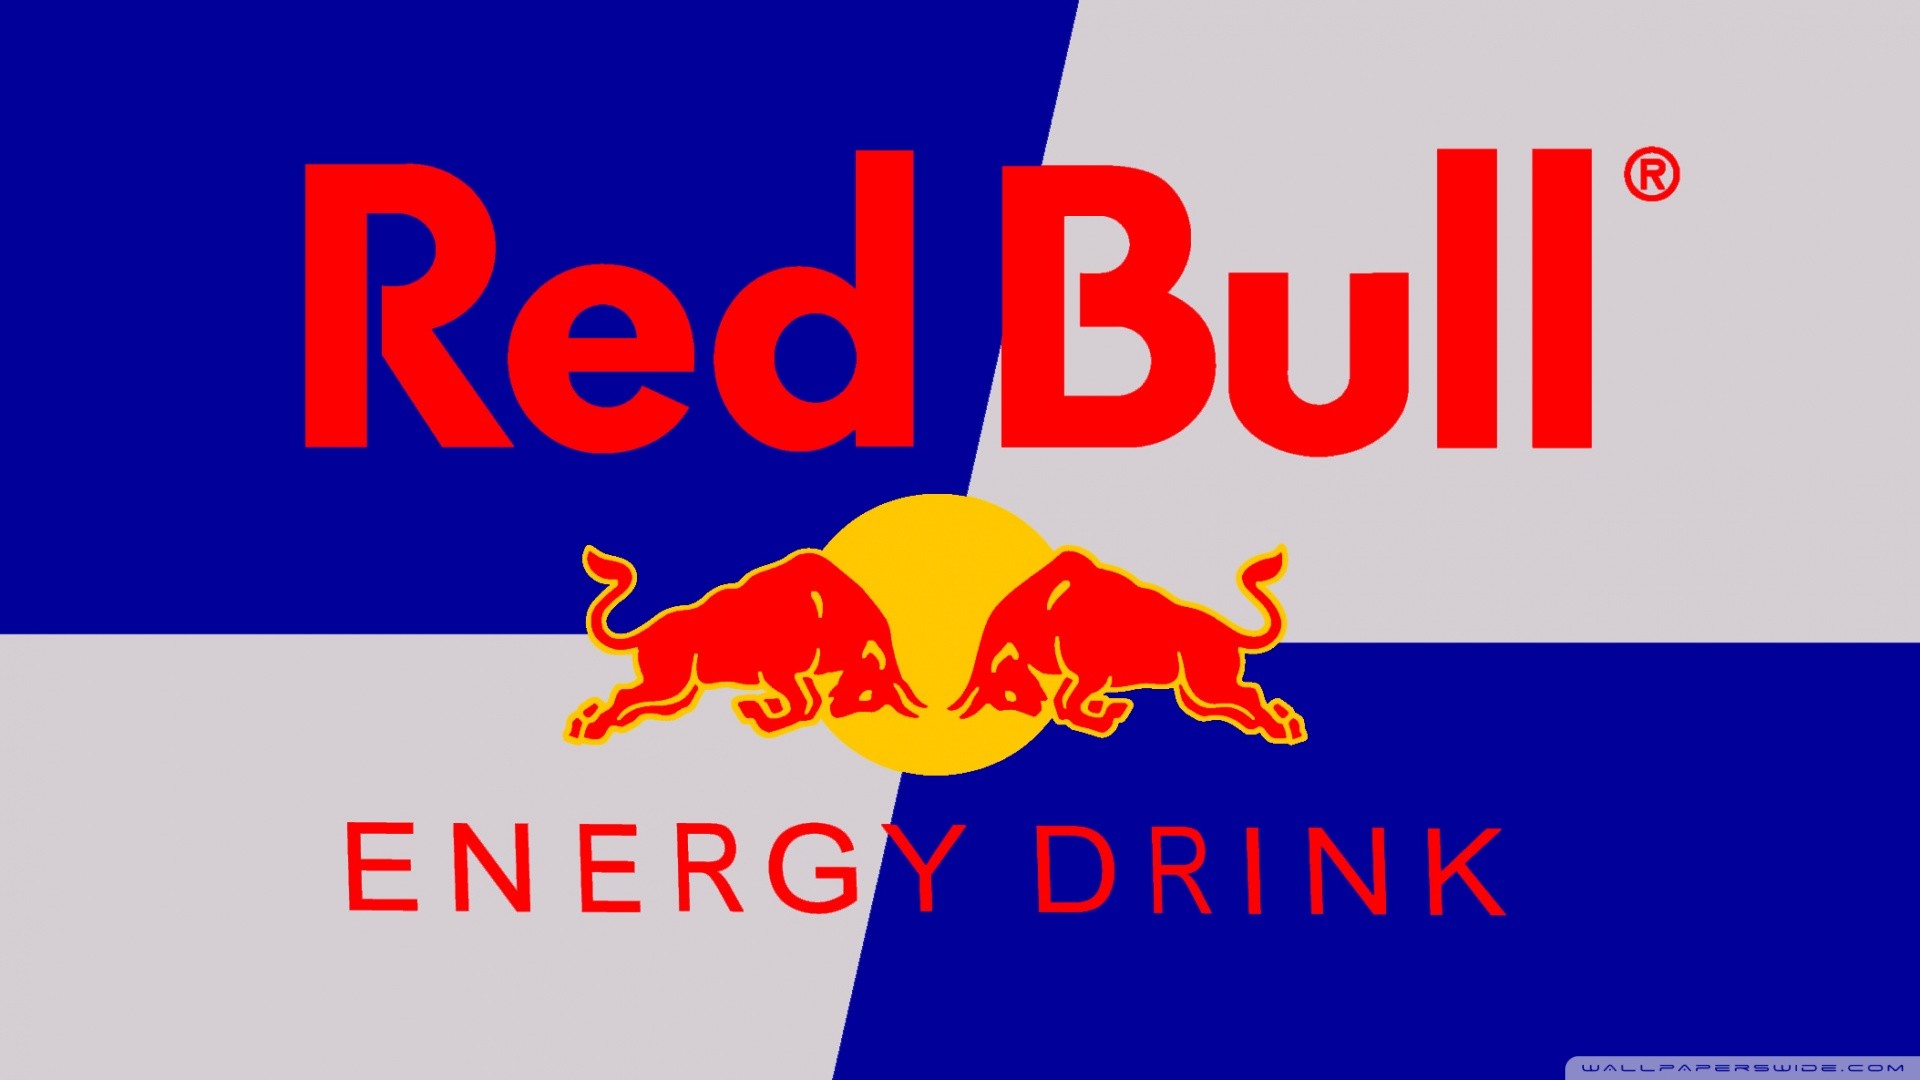 1920x1080 Red Bull HD Wallpapers 10 | HD Wallpapers | Pinterest | Red bull, Bulls  wallpaper and Hd wallpaper